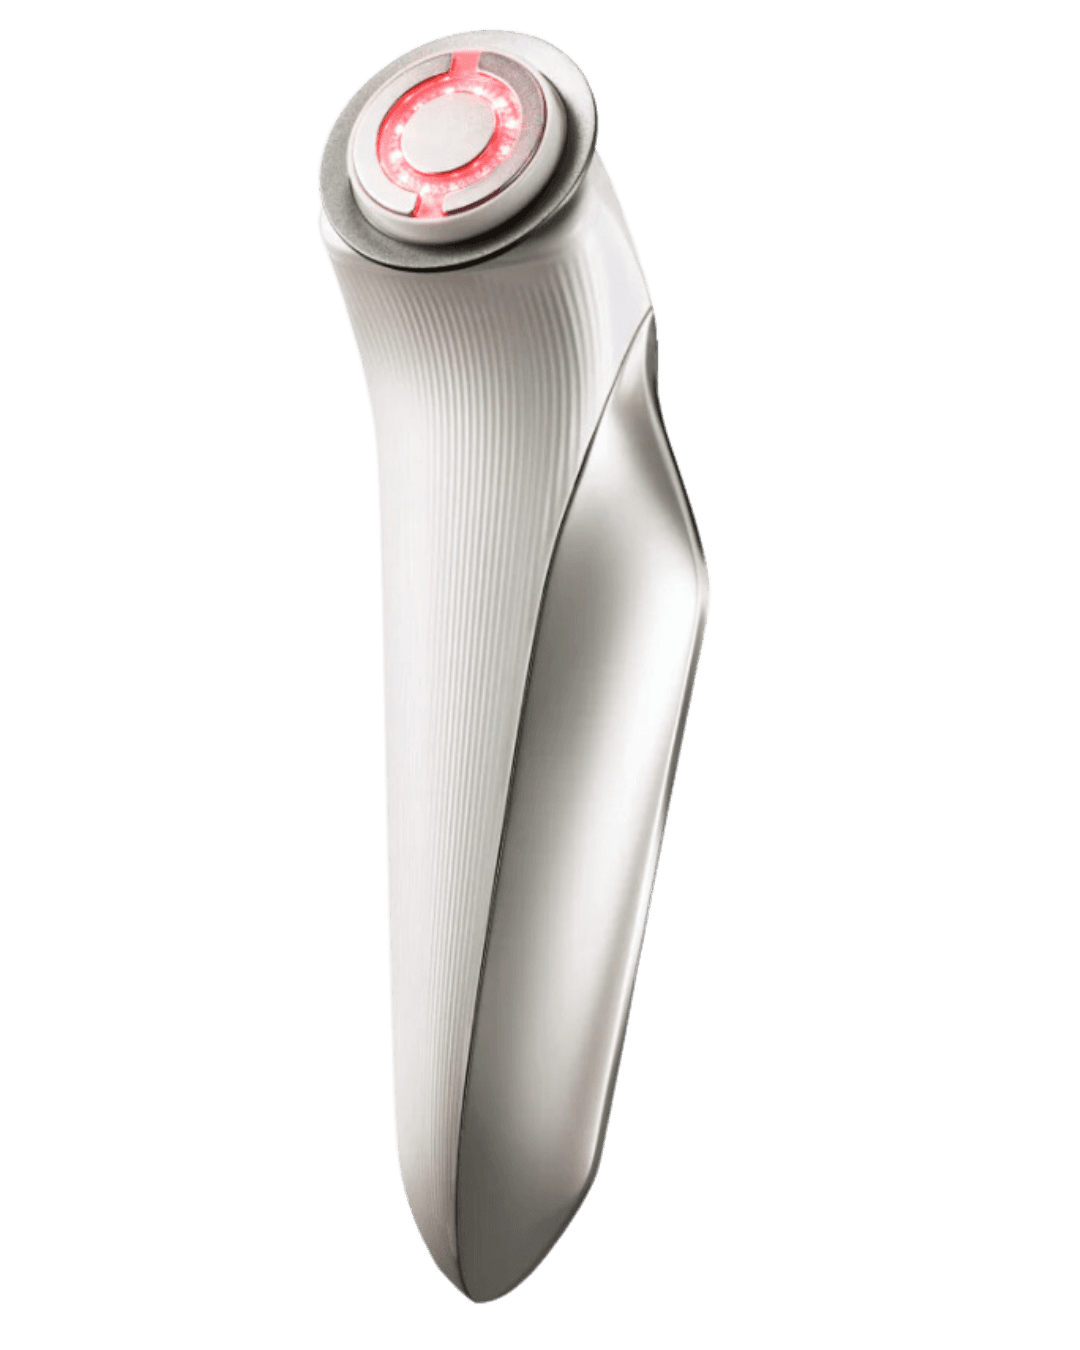 REFA LED Light Therapy Device